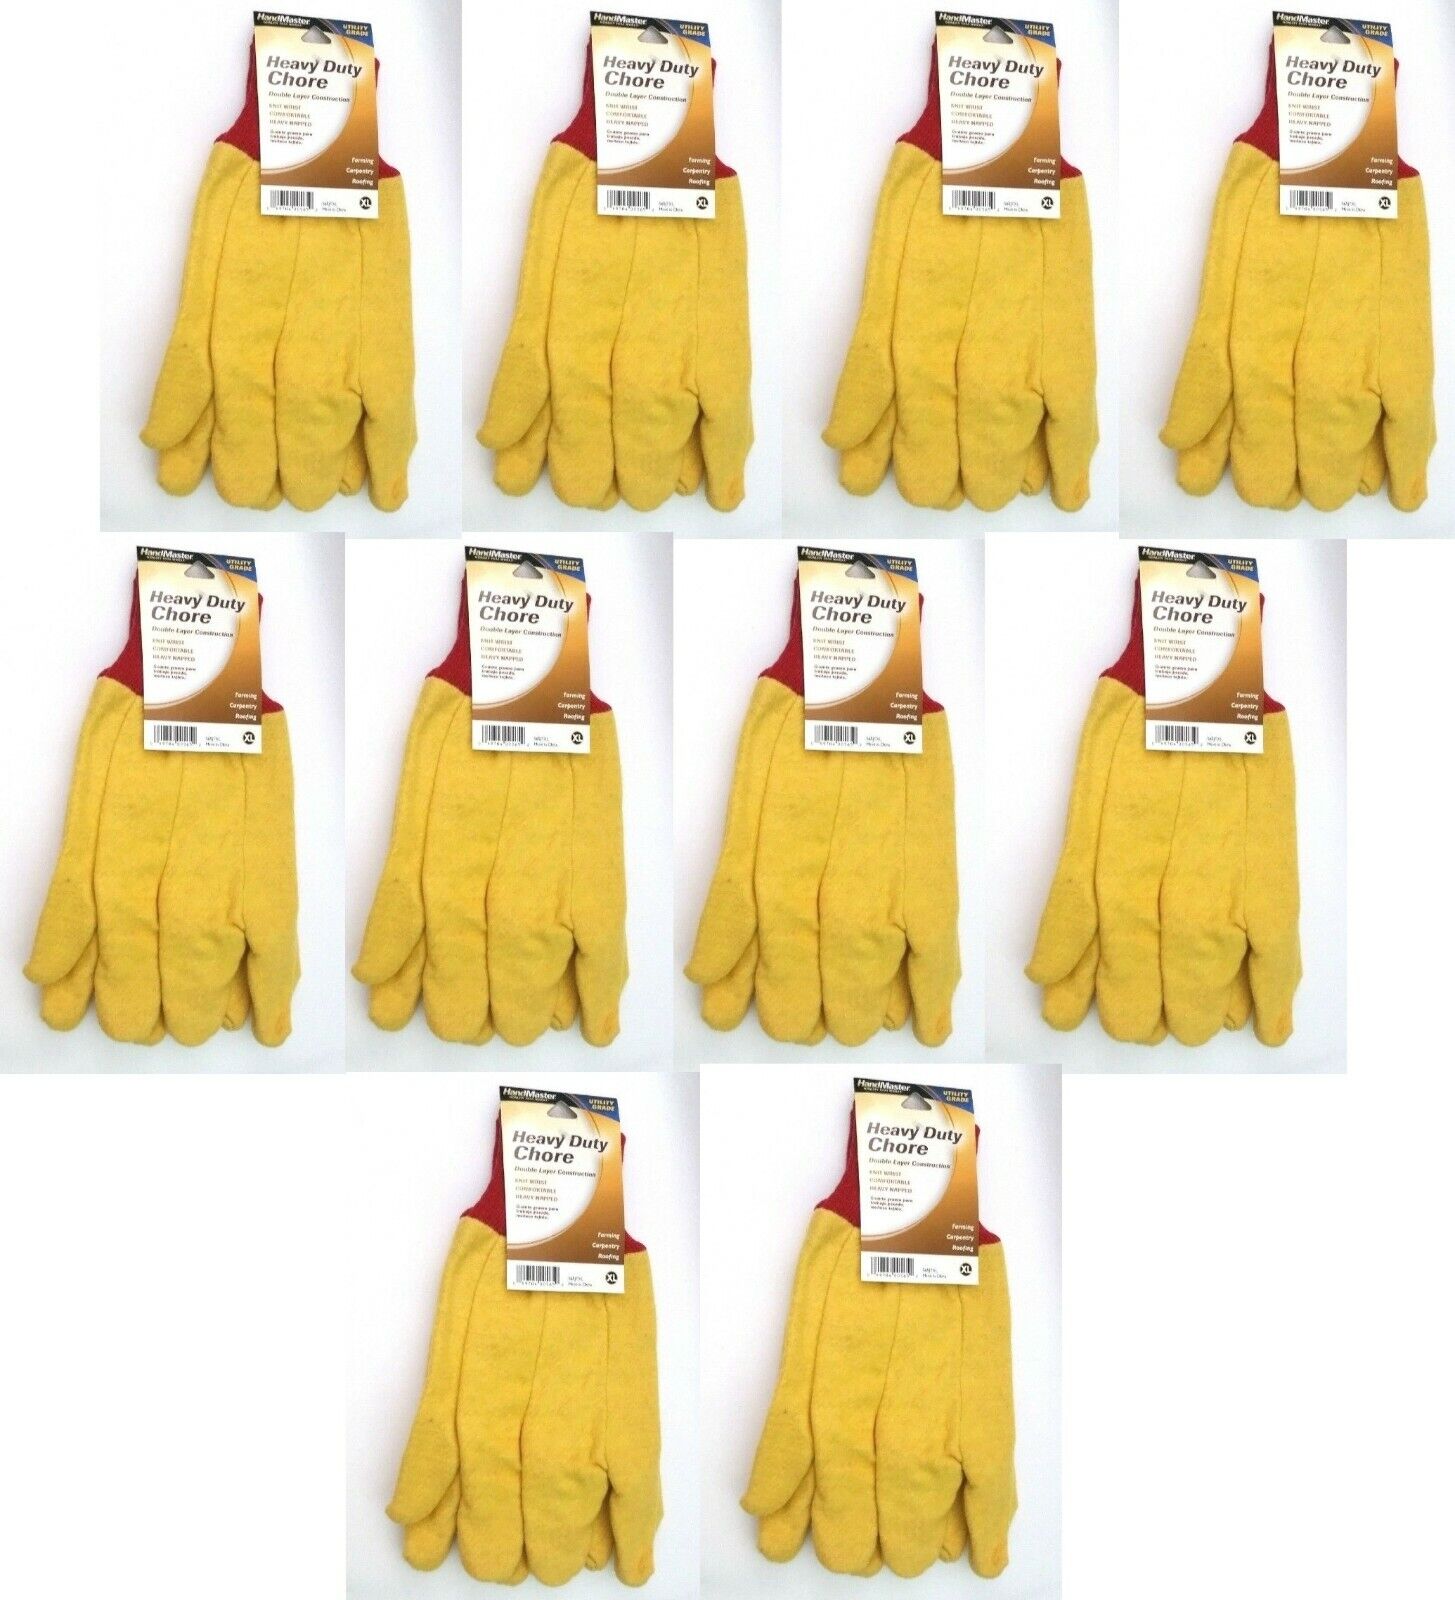 (10 Pairs) Roofing Carpentry Farming Utility Heavy Duty Chore Double Layer Glove MAGID GLOVE & SAFETY MFG. does not apply - фотография #9